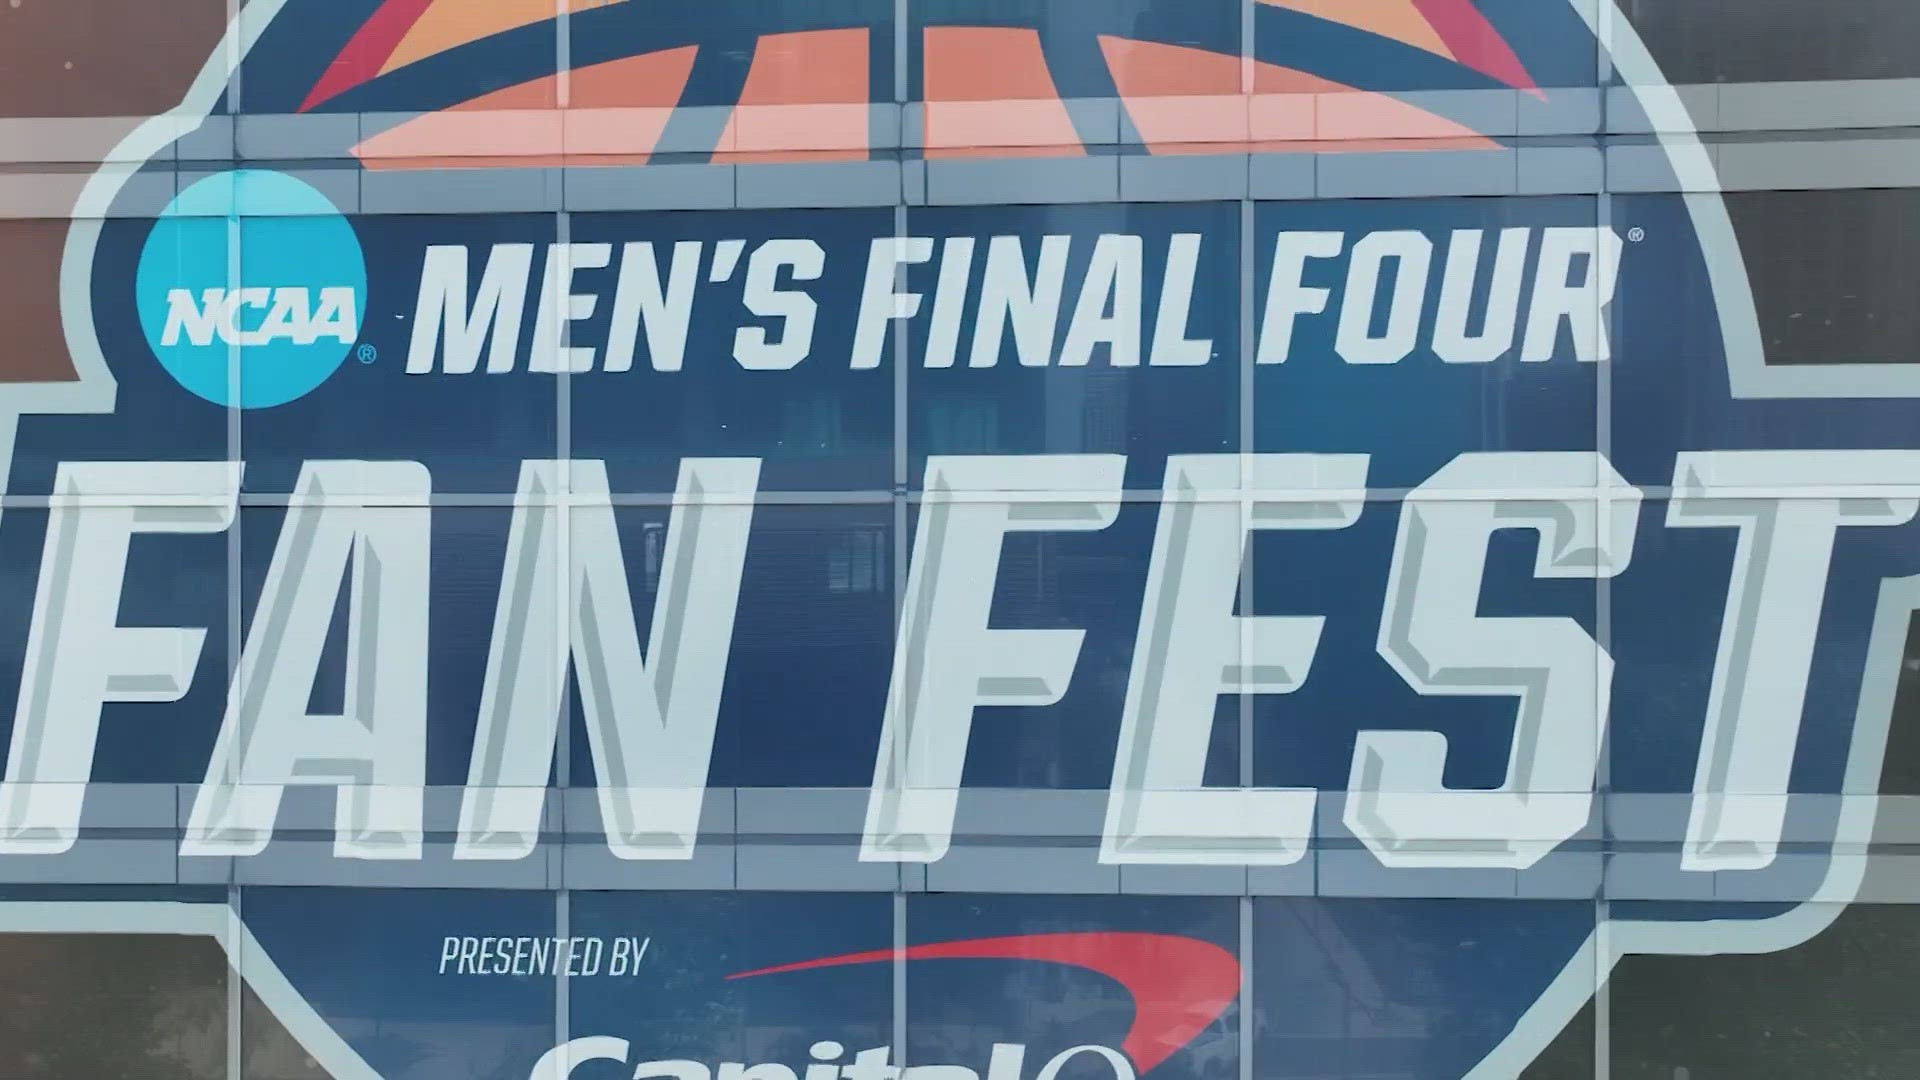 KHOU 11 investigative reporter Jeremy Rogalski breaks down the numbers on what it takes to pull off the Final Four.